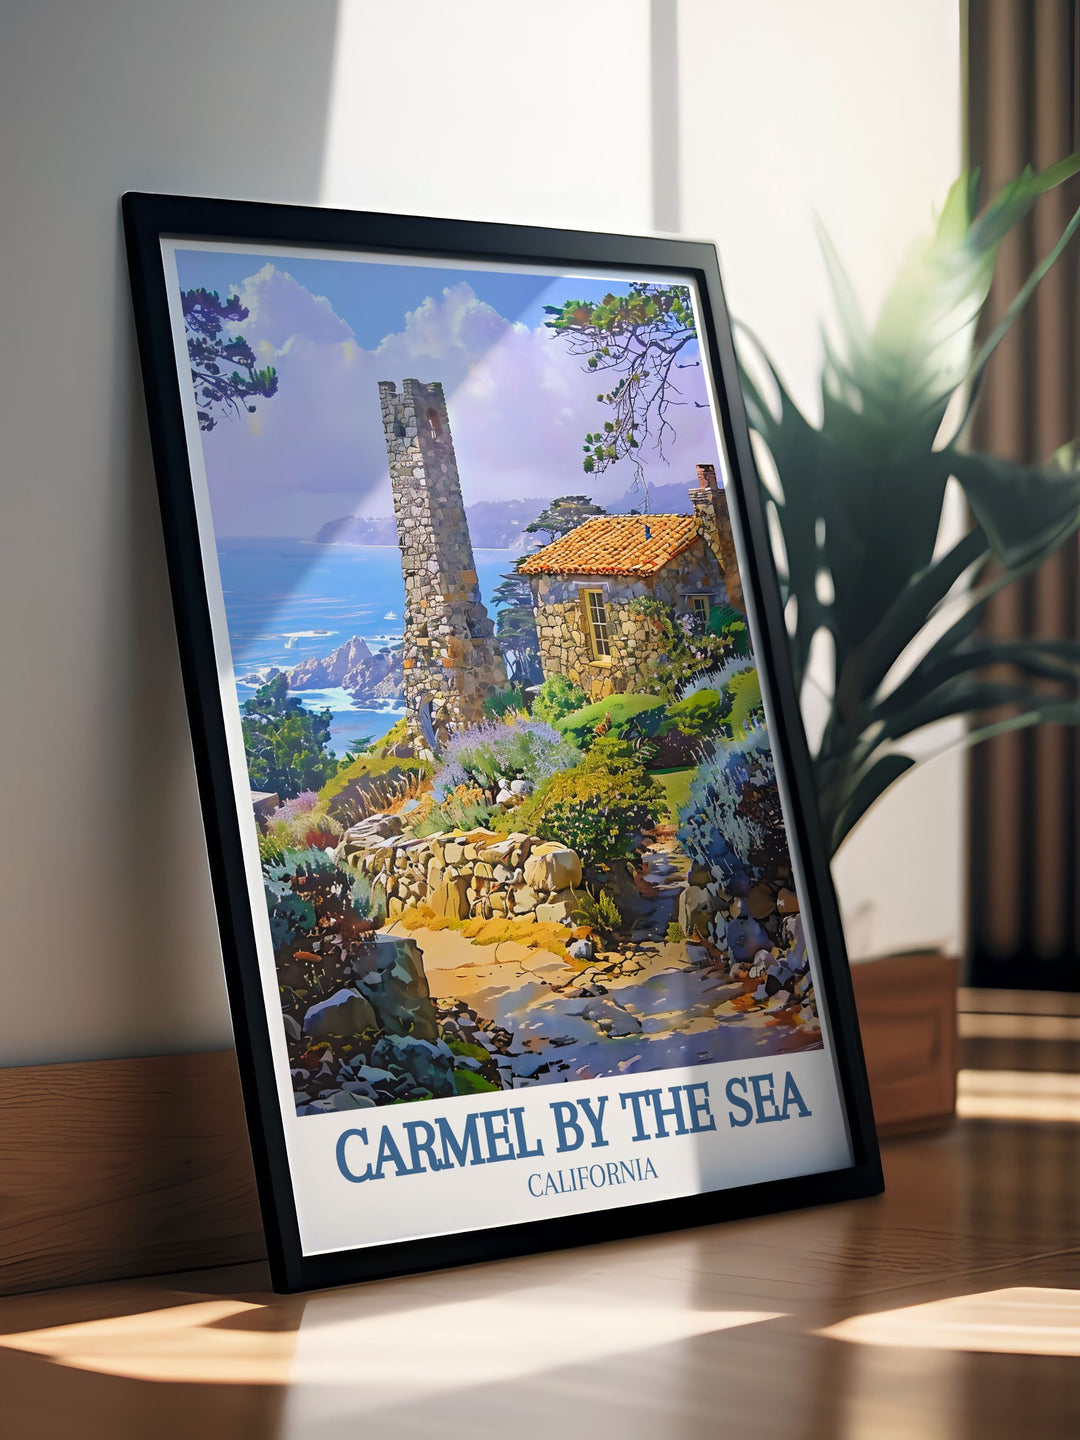 Tor House in Carmel by the Sea is beautifully depicted in this travel poster, showcasing its stone construction and scenic location. Bring a touch of Californias rich history into your living space with this exquisite artwork.